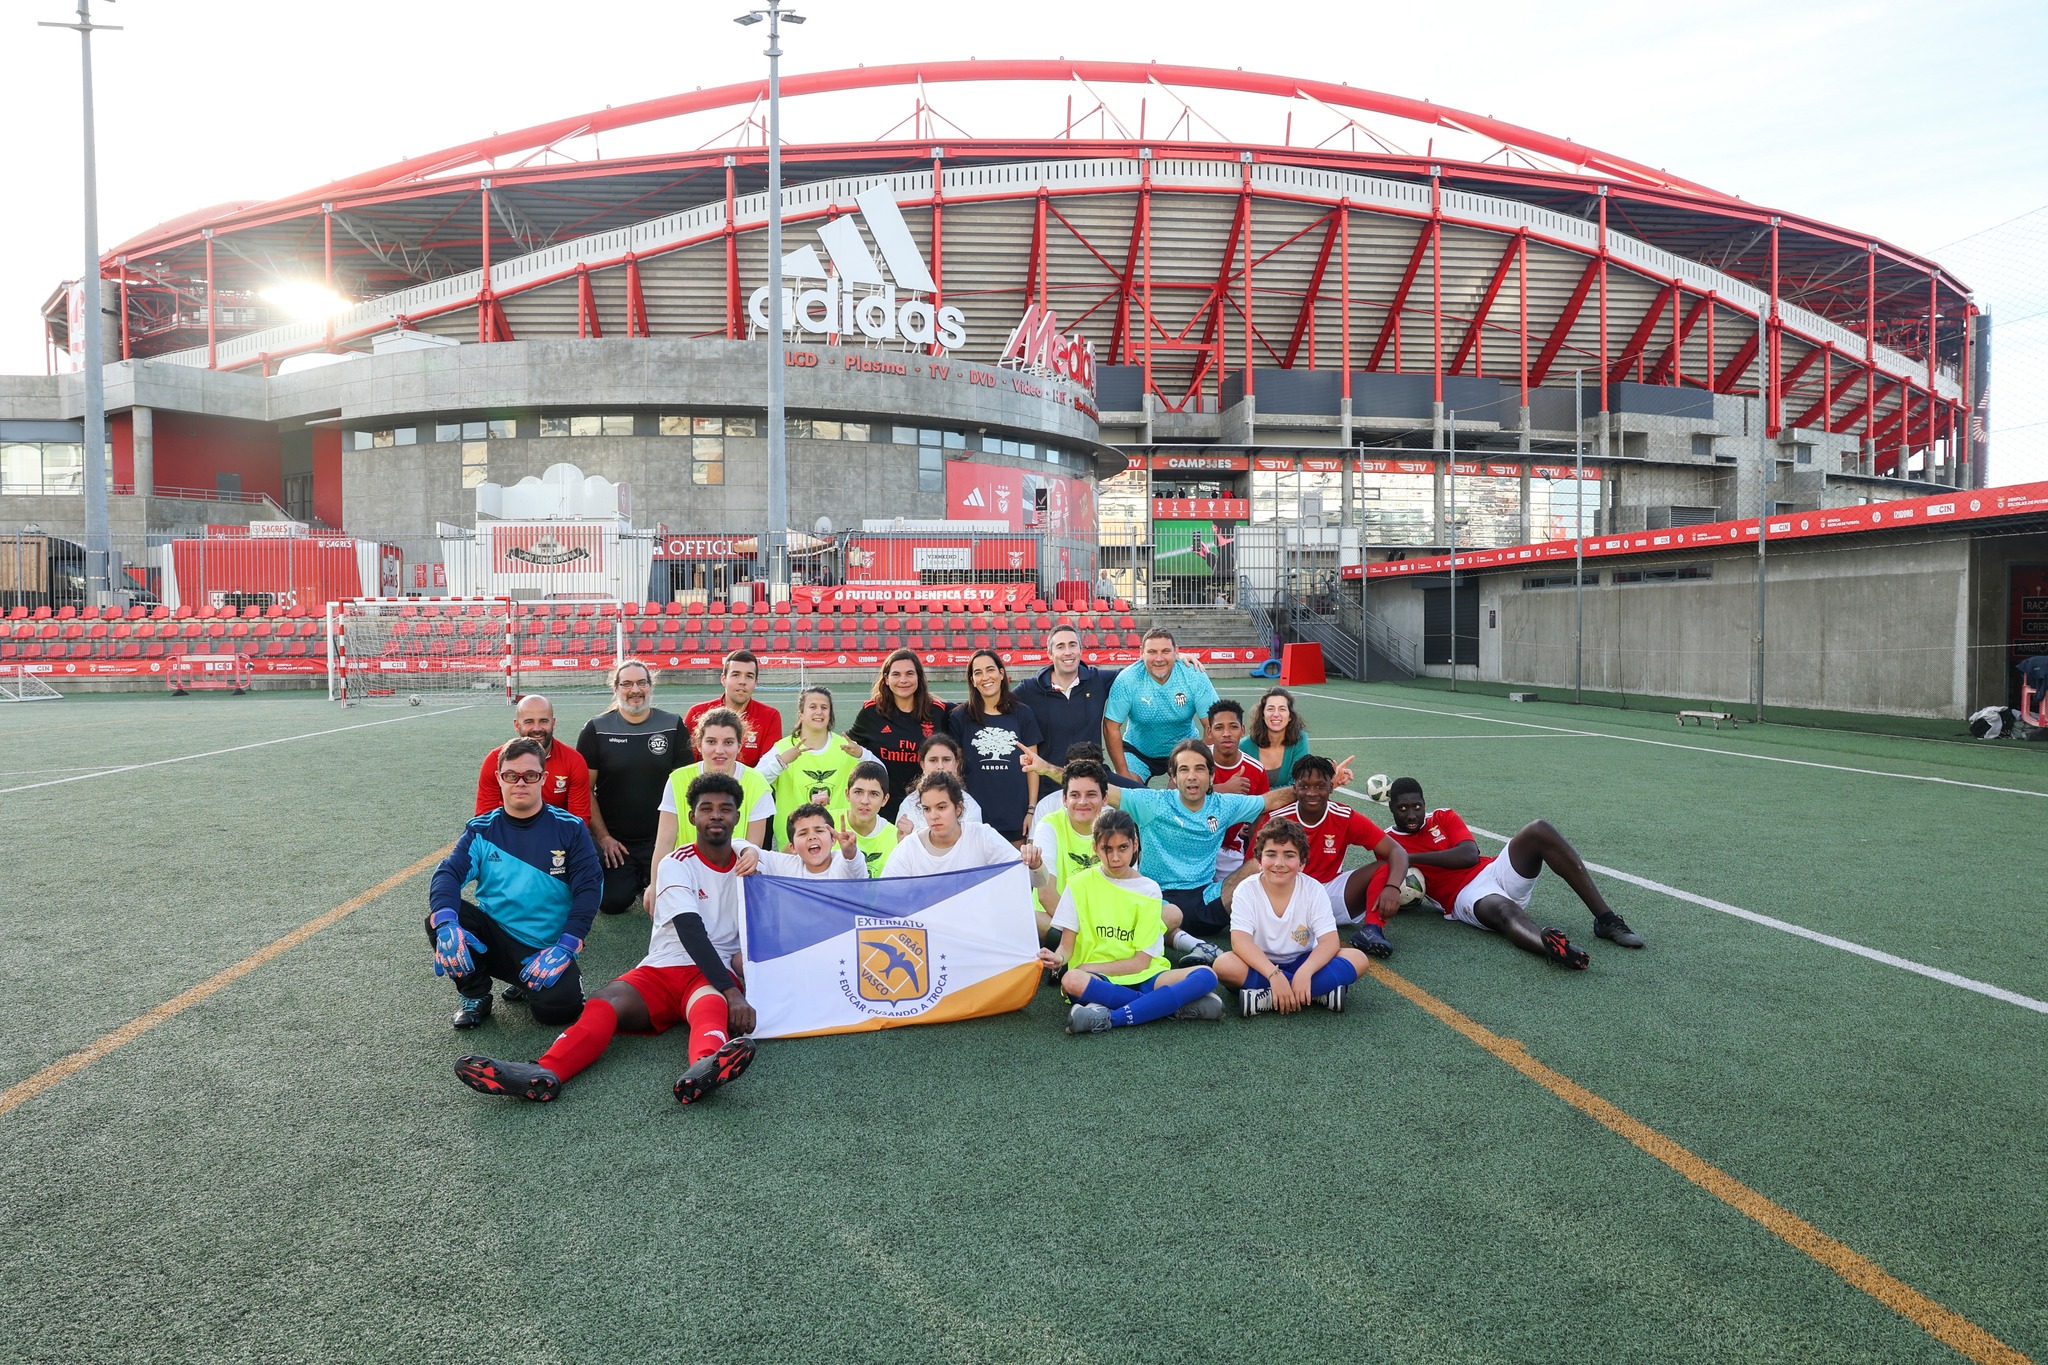 Group of participants in the intellectual disabilities football workshop and project team pictured on a training pitch, featuring the Benfica Stadium in the background